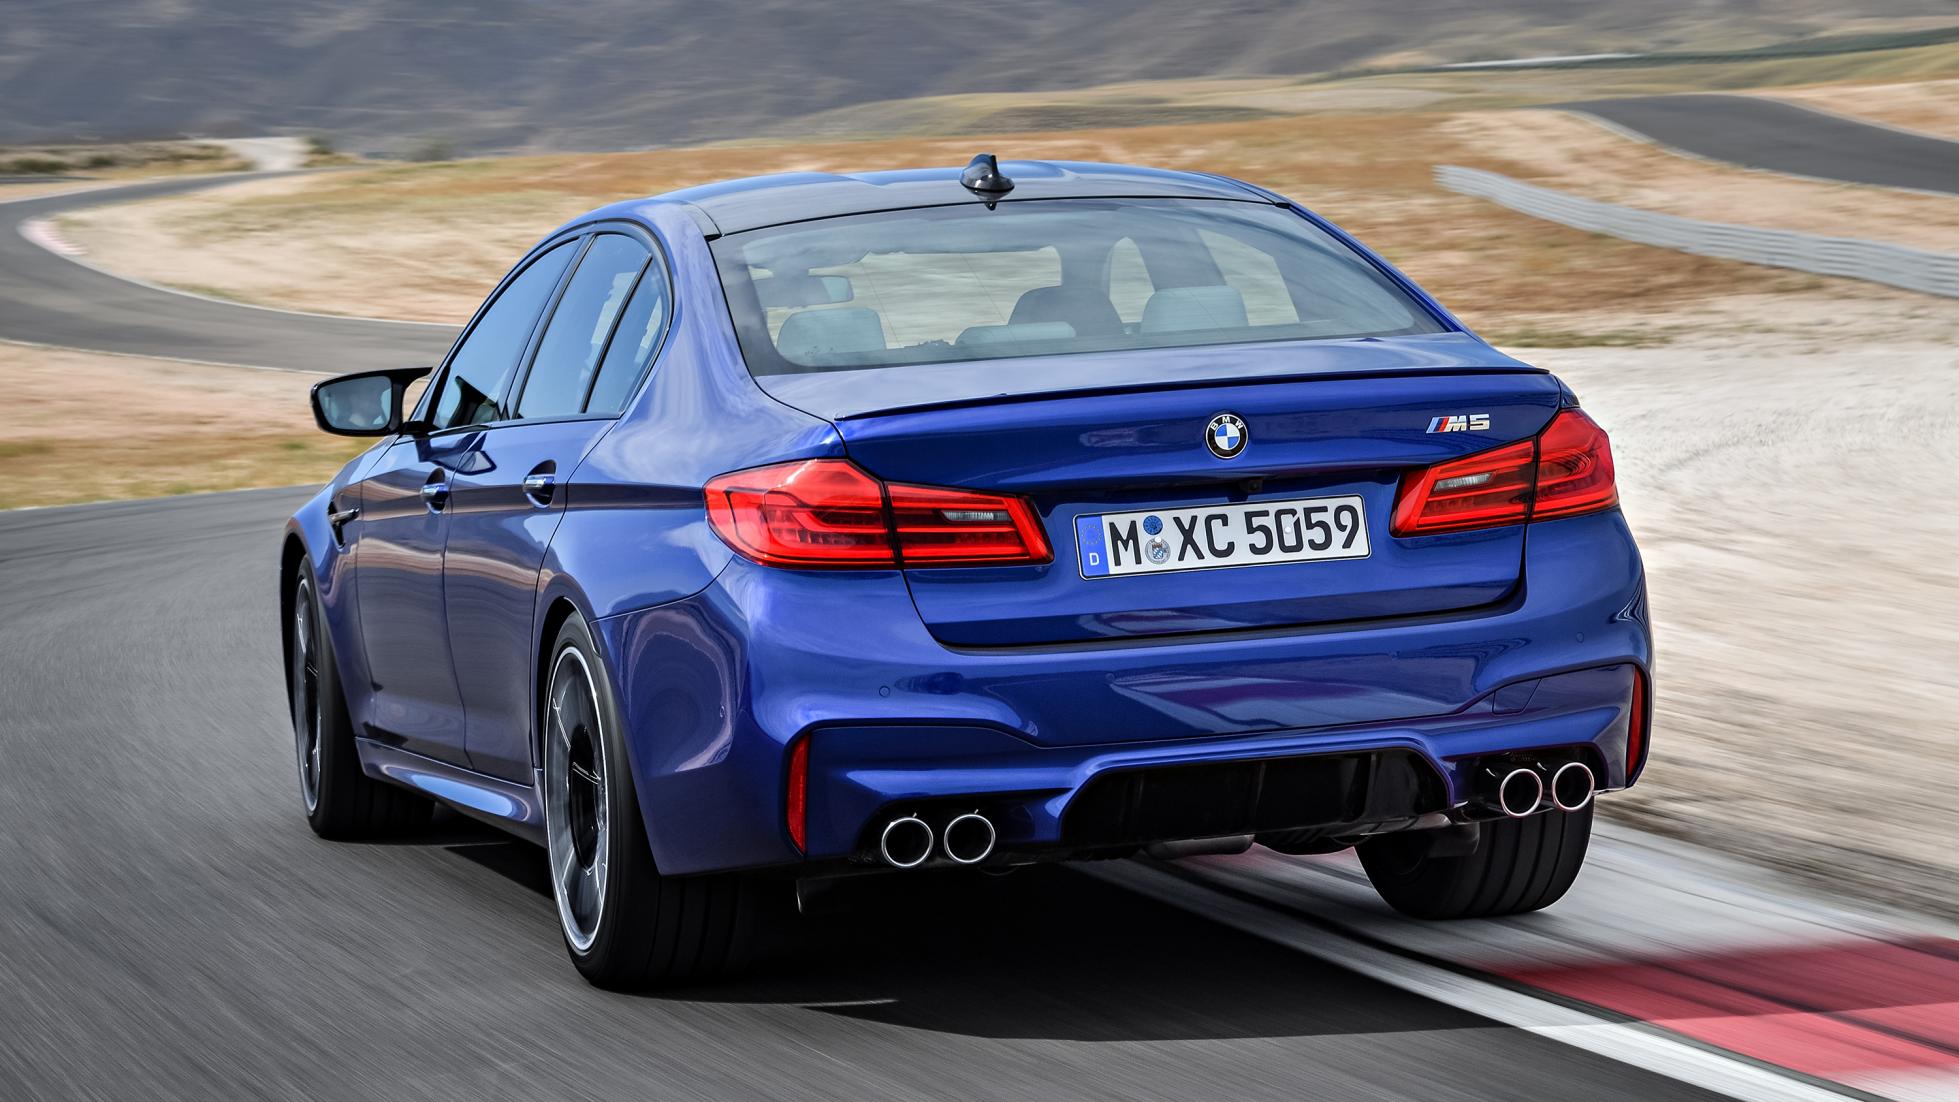 p90272987_highres_the-new-bmw-m5-08-20